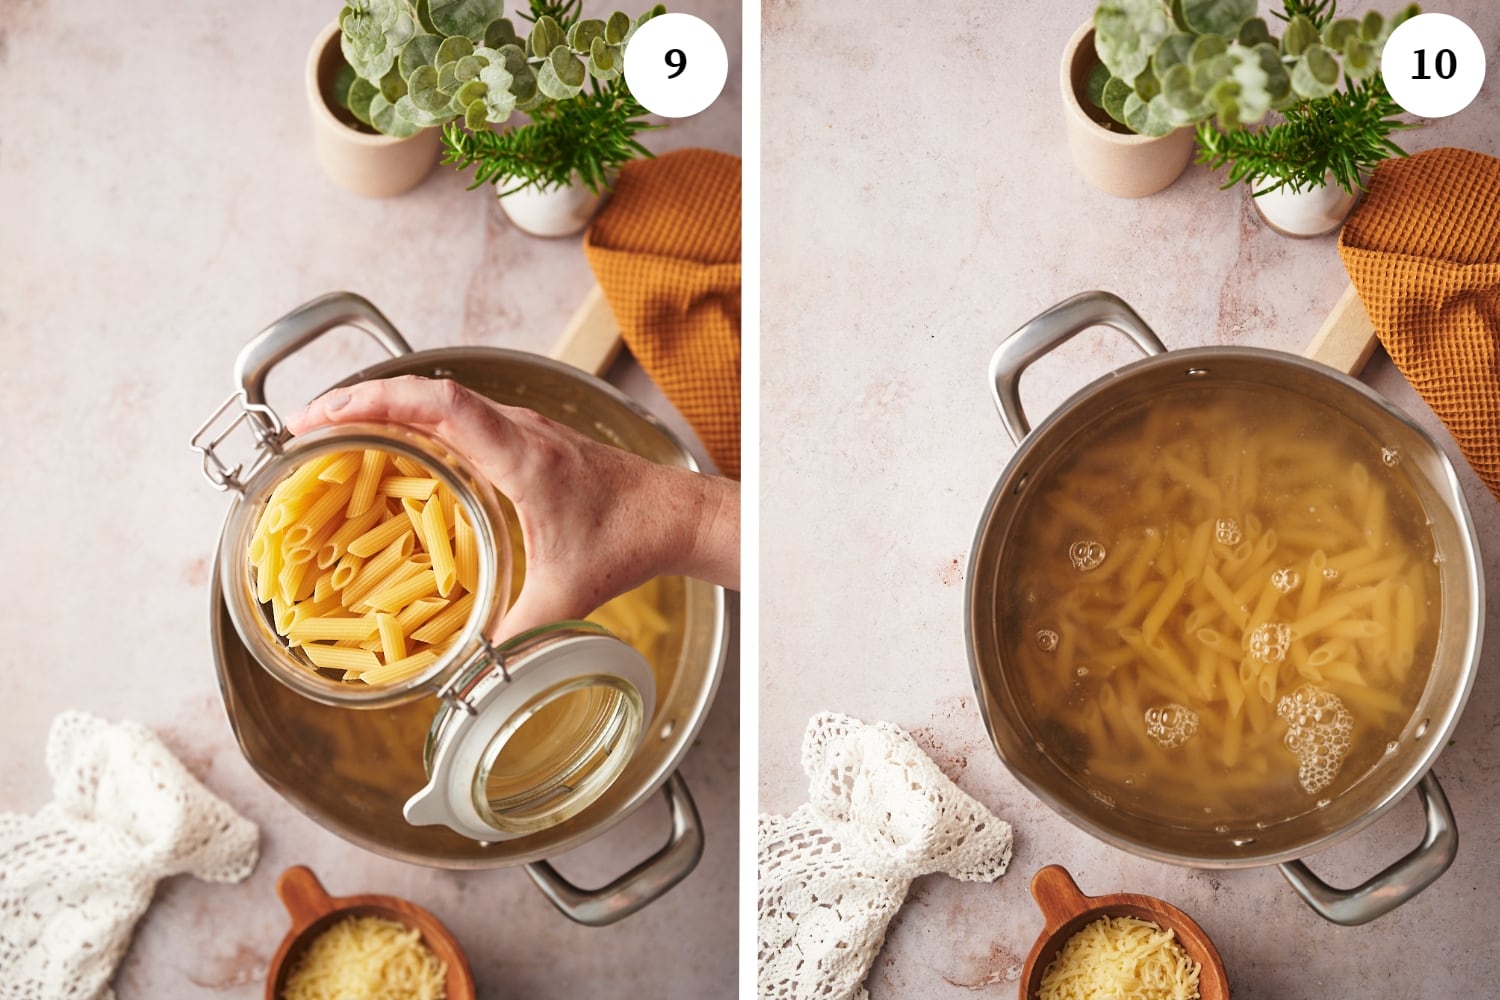 baked penne procedure: jar of penne pasta being put in a pot with water. next photo is pasta being boiled in water.